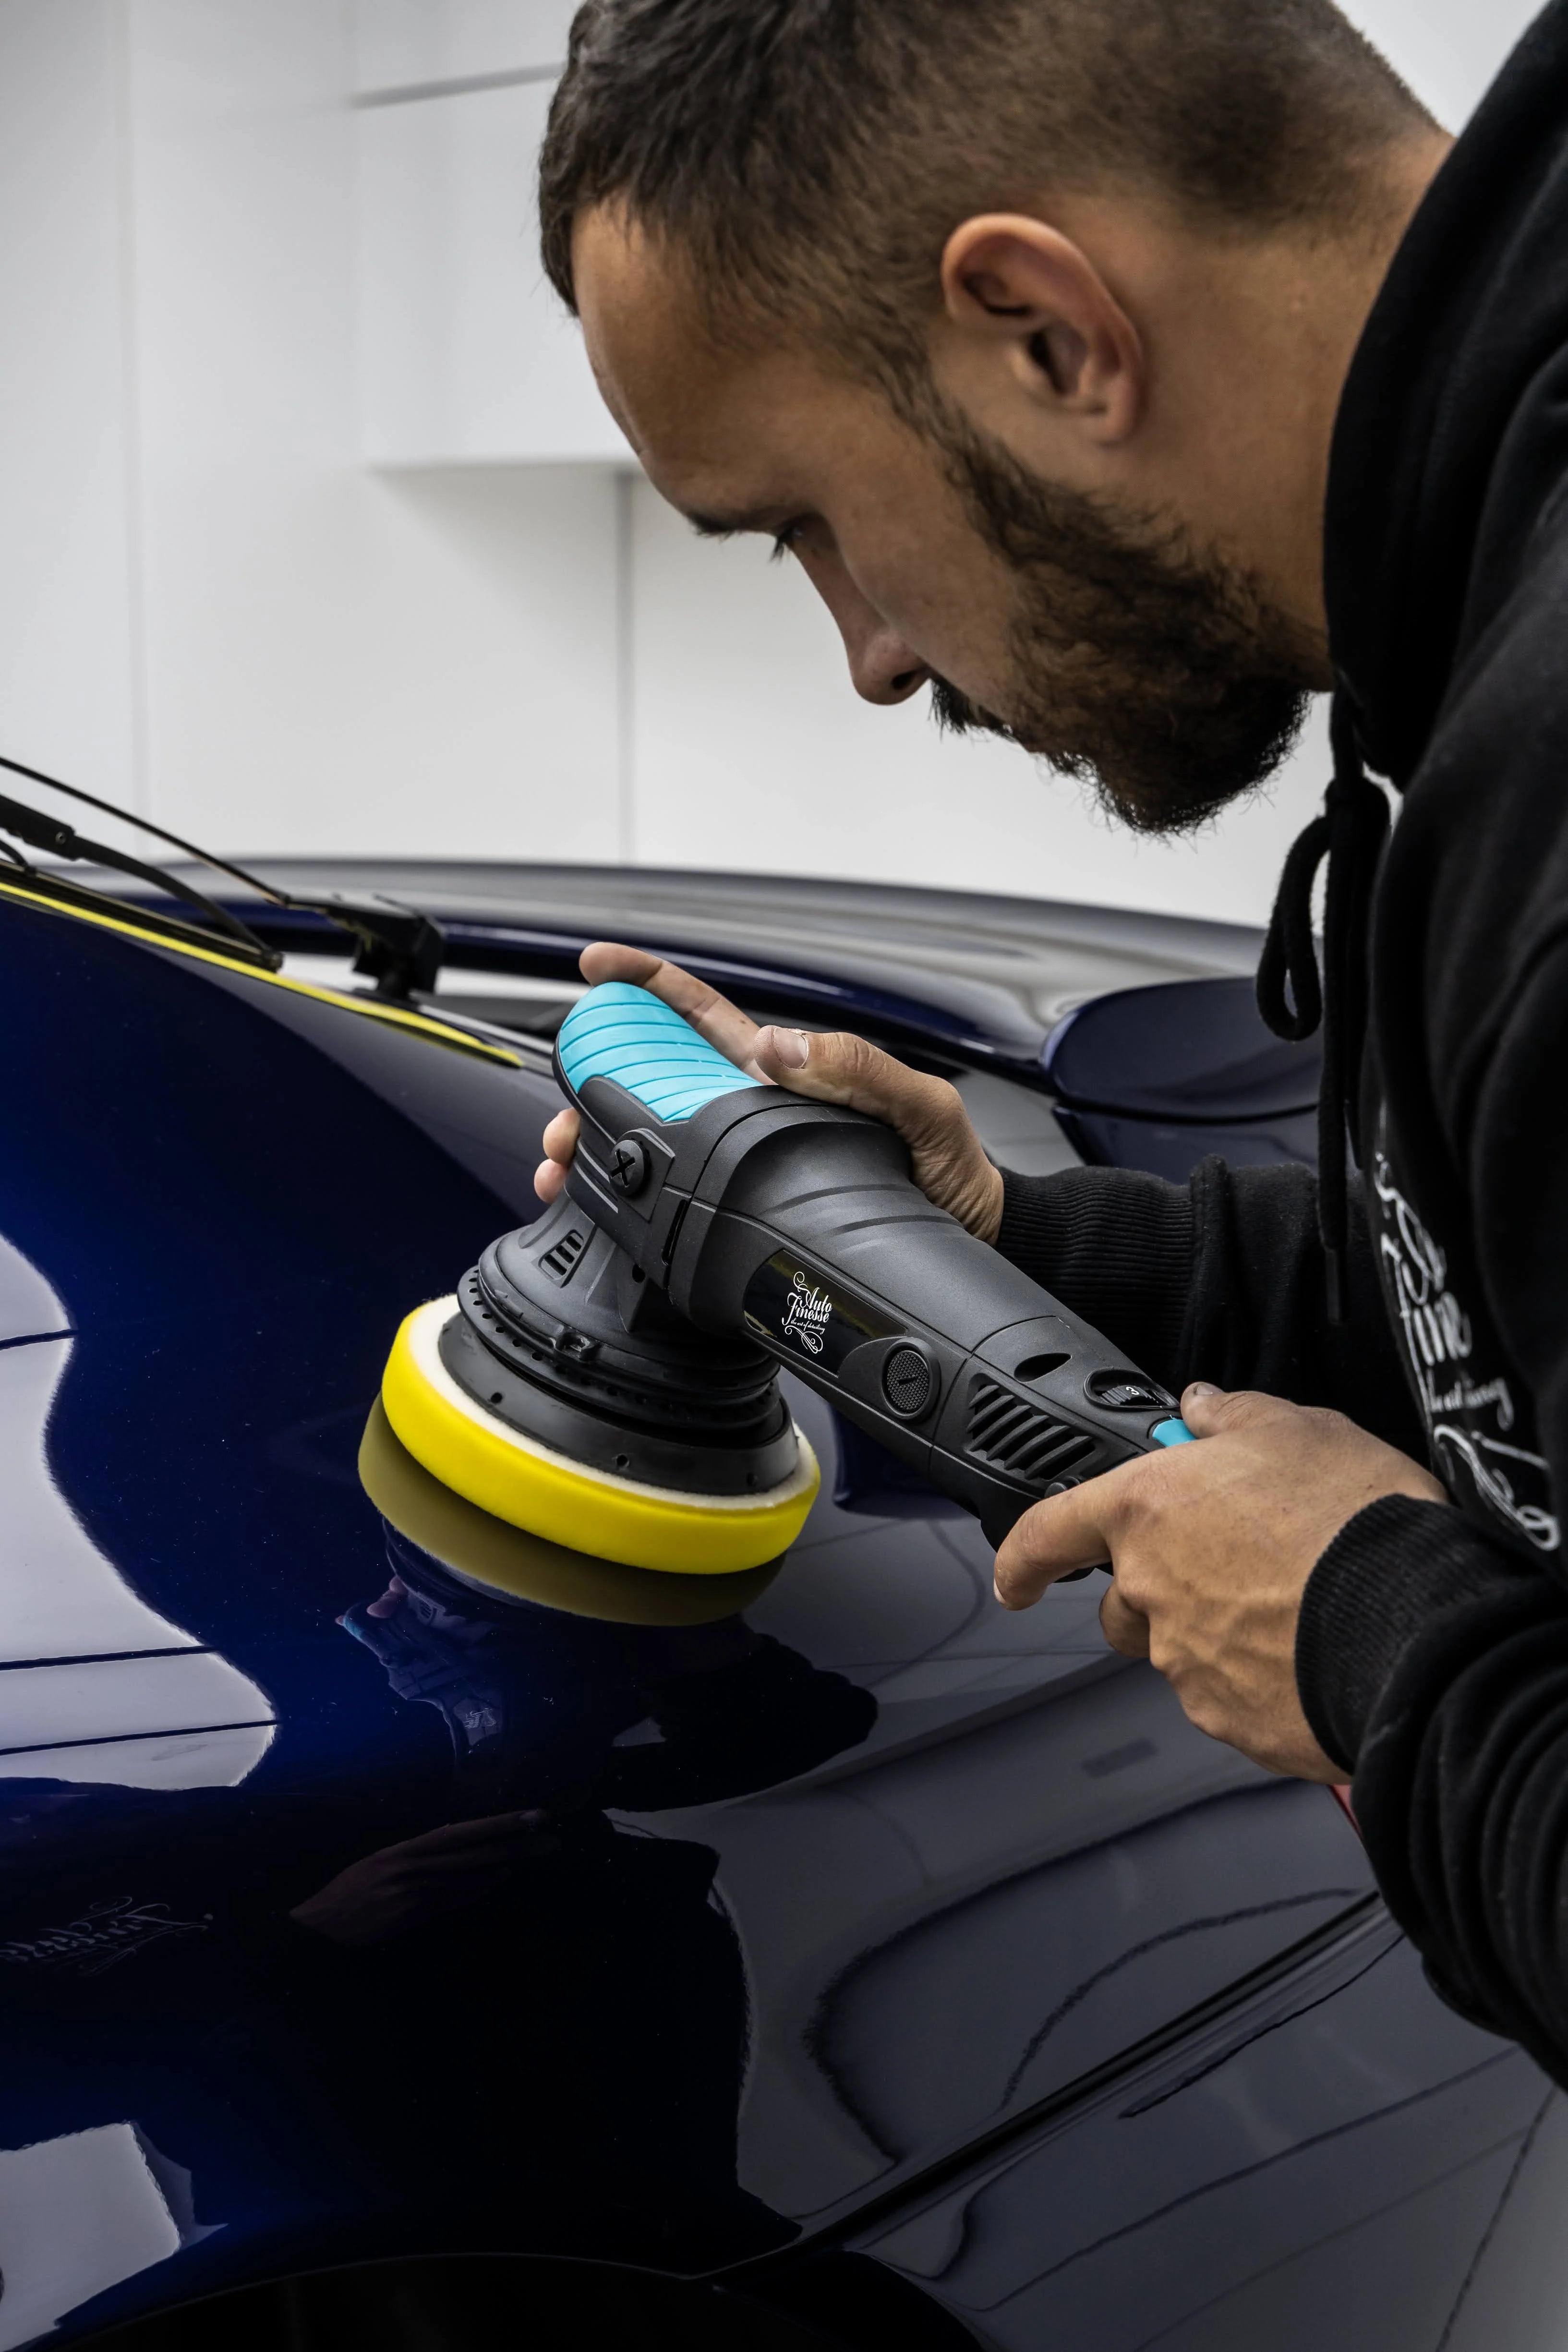 Auto Finesse | Car Detailing Academy | Tailored Courses for Your Need